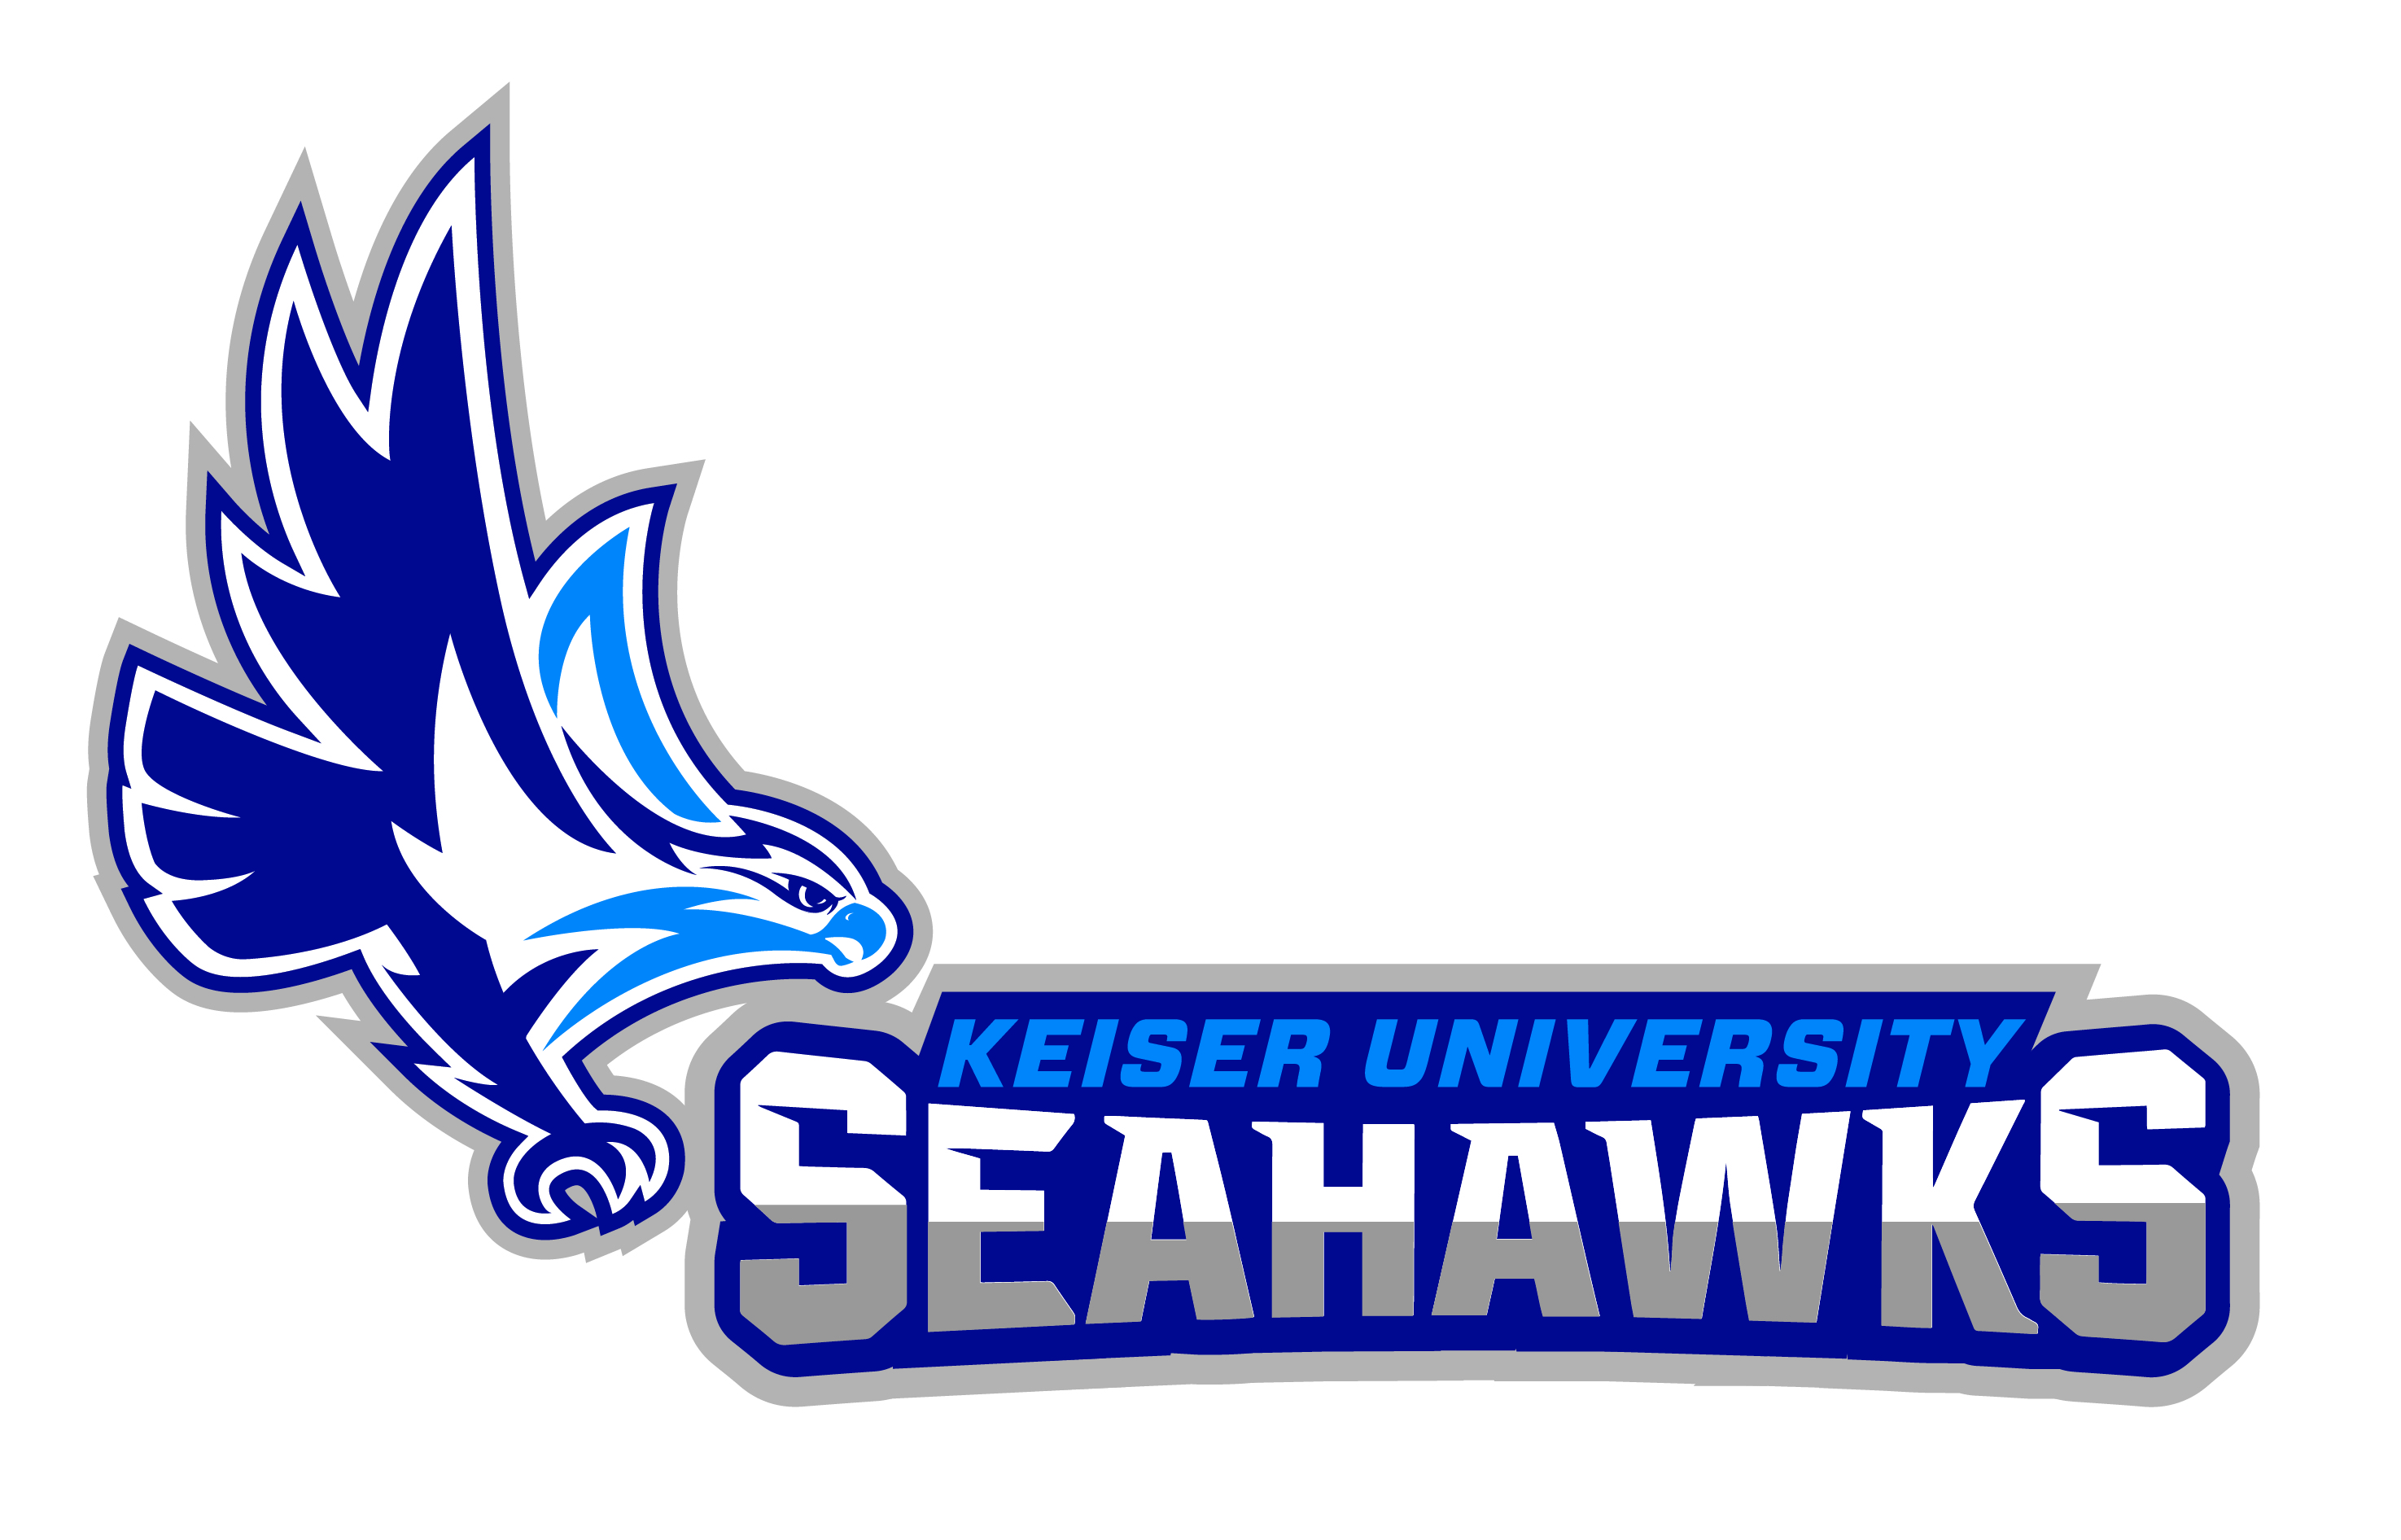 Is tuition at Keiser University the same for all students?